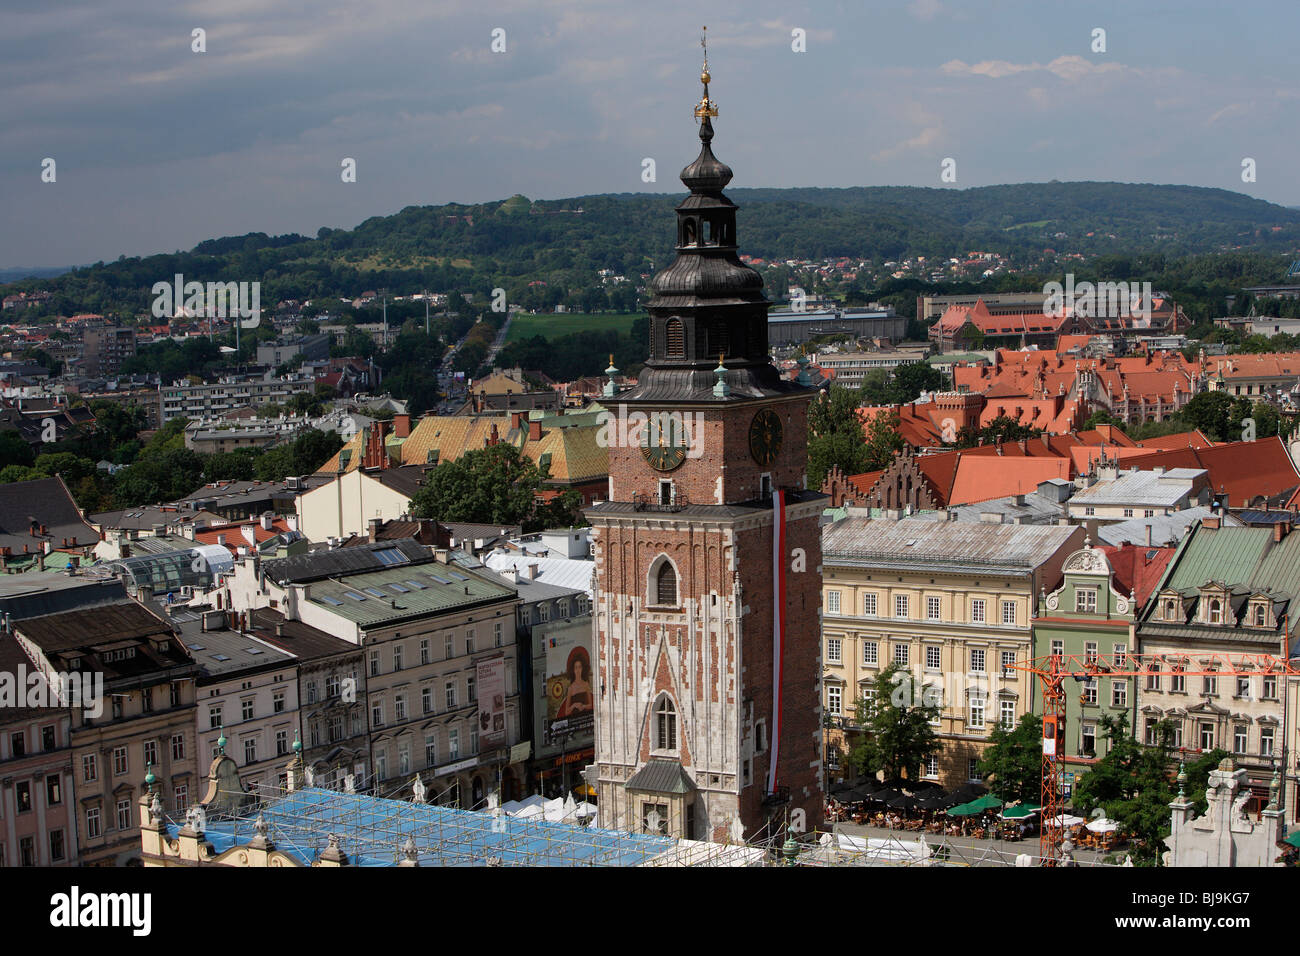 Great Market Square or Main Square,Town Hall Tower,70m tall, end of 13th century,Cracow, Krakow,Poland Stock Photo